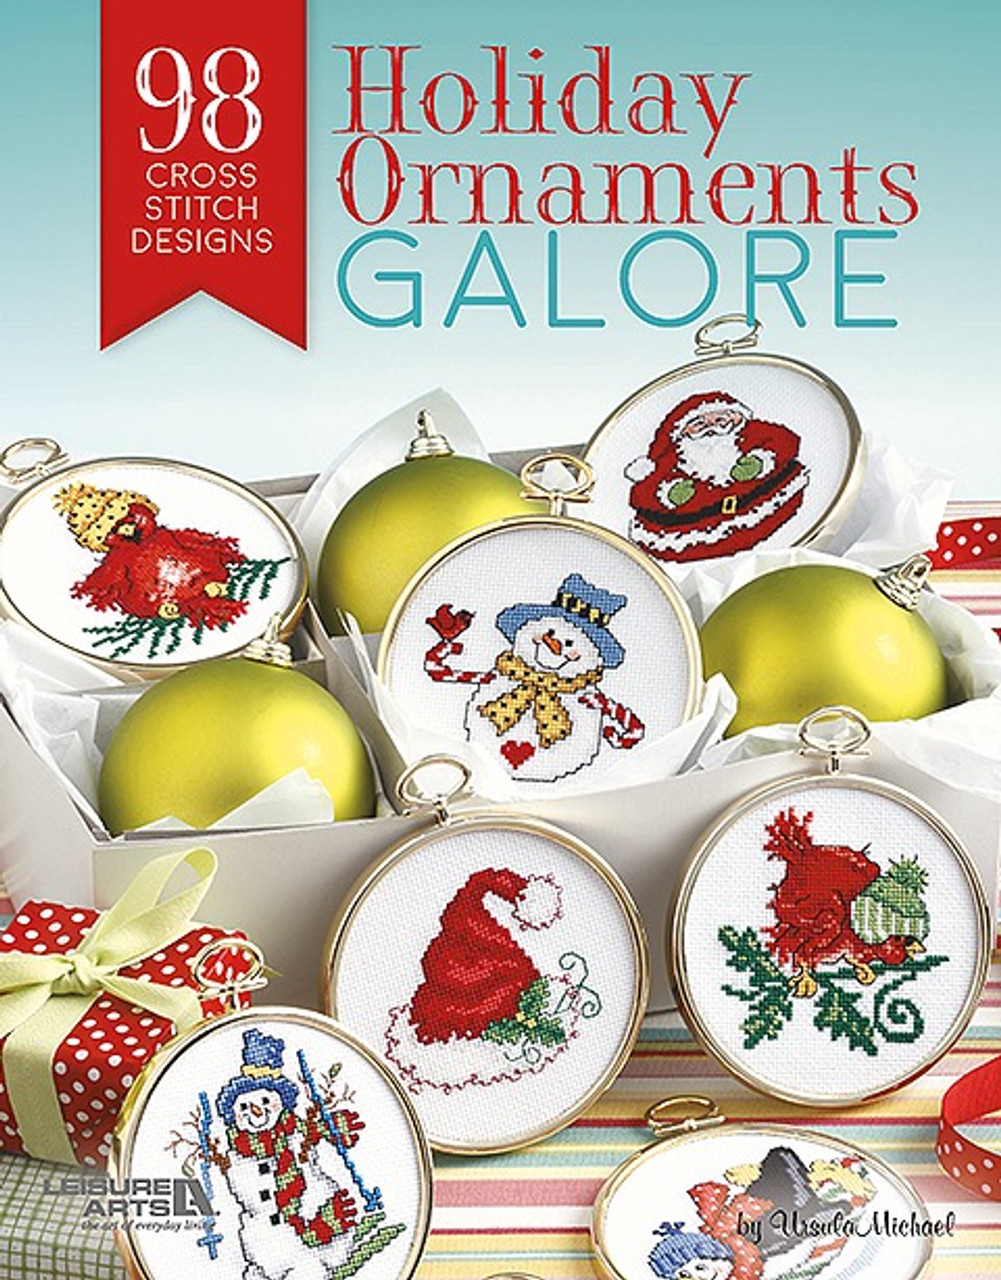 Holiday Ornaments Galore [Book]